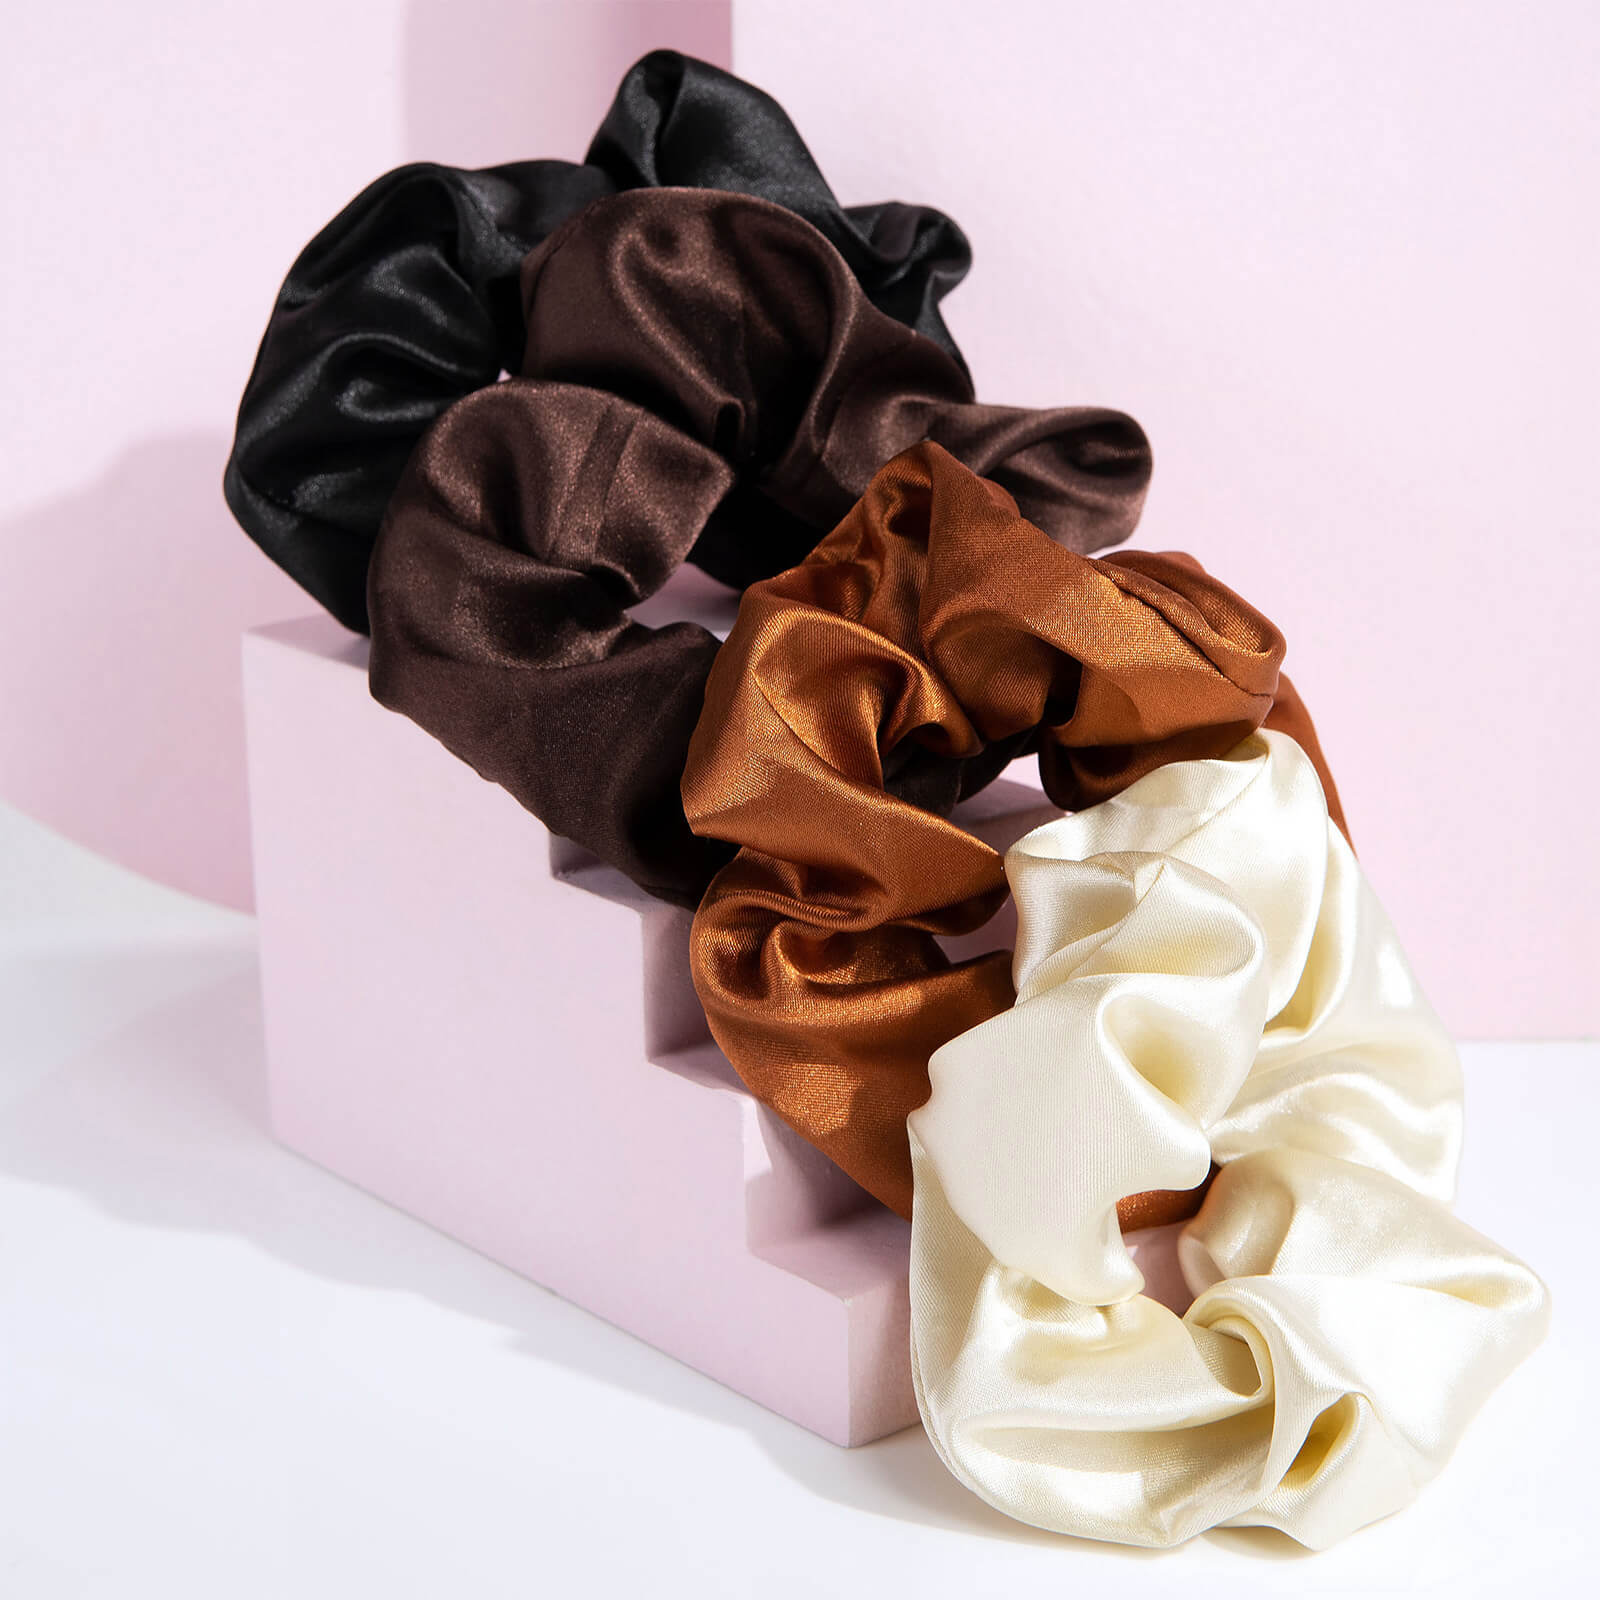 Artikel klicken und genauer betrachten! - Arriving in an assortment of stylish nude shades, Brushworks’ Satin Scrunchies work to style and secure your hair firmly into place.  The ultra-lightweight scrunchies are crafted with a satin fabric to help minimise friction and the risk of breakage. An elasticated stretch works to comfortably keep the lengths in place throughout the day. Suitable for all hair types and textures. | im Online Shop kaufen